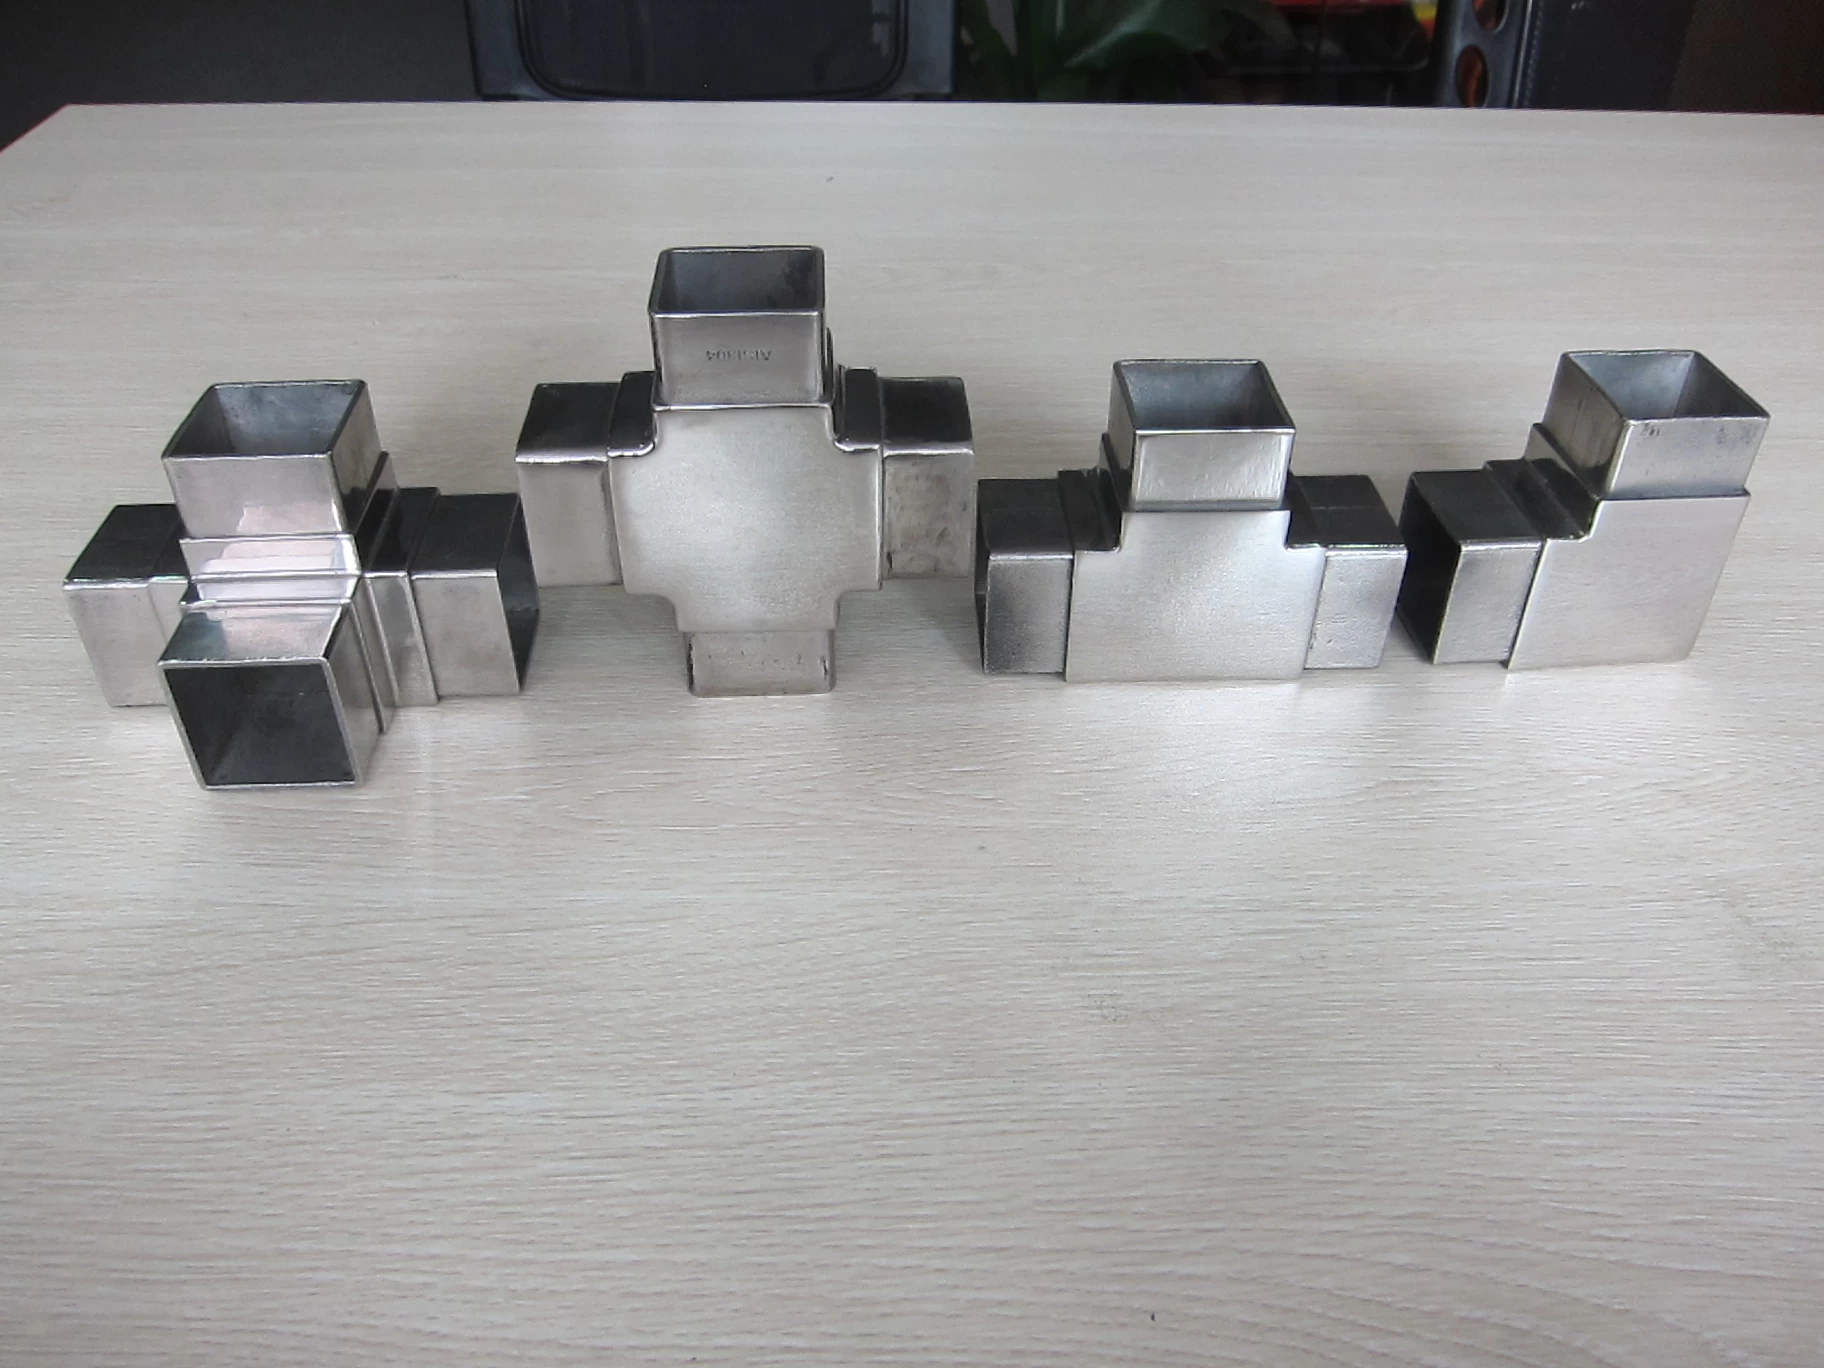 Stainless steel square tube connector joiners for 40x40mm, 1.5mm thick tube